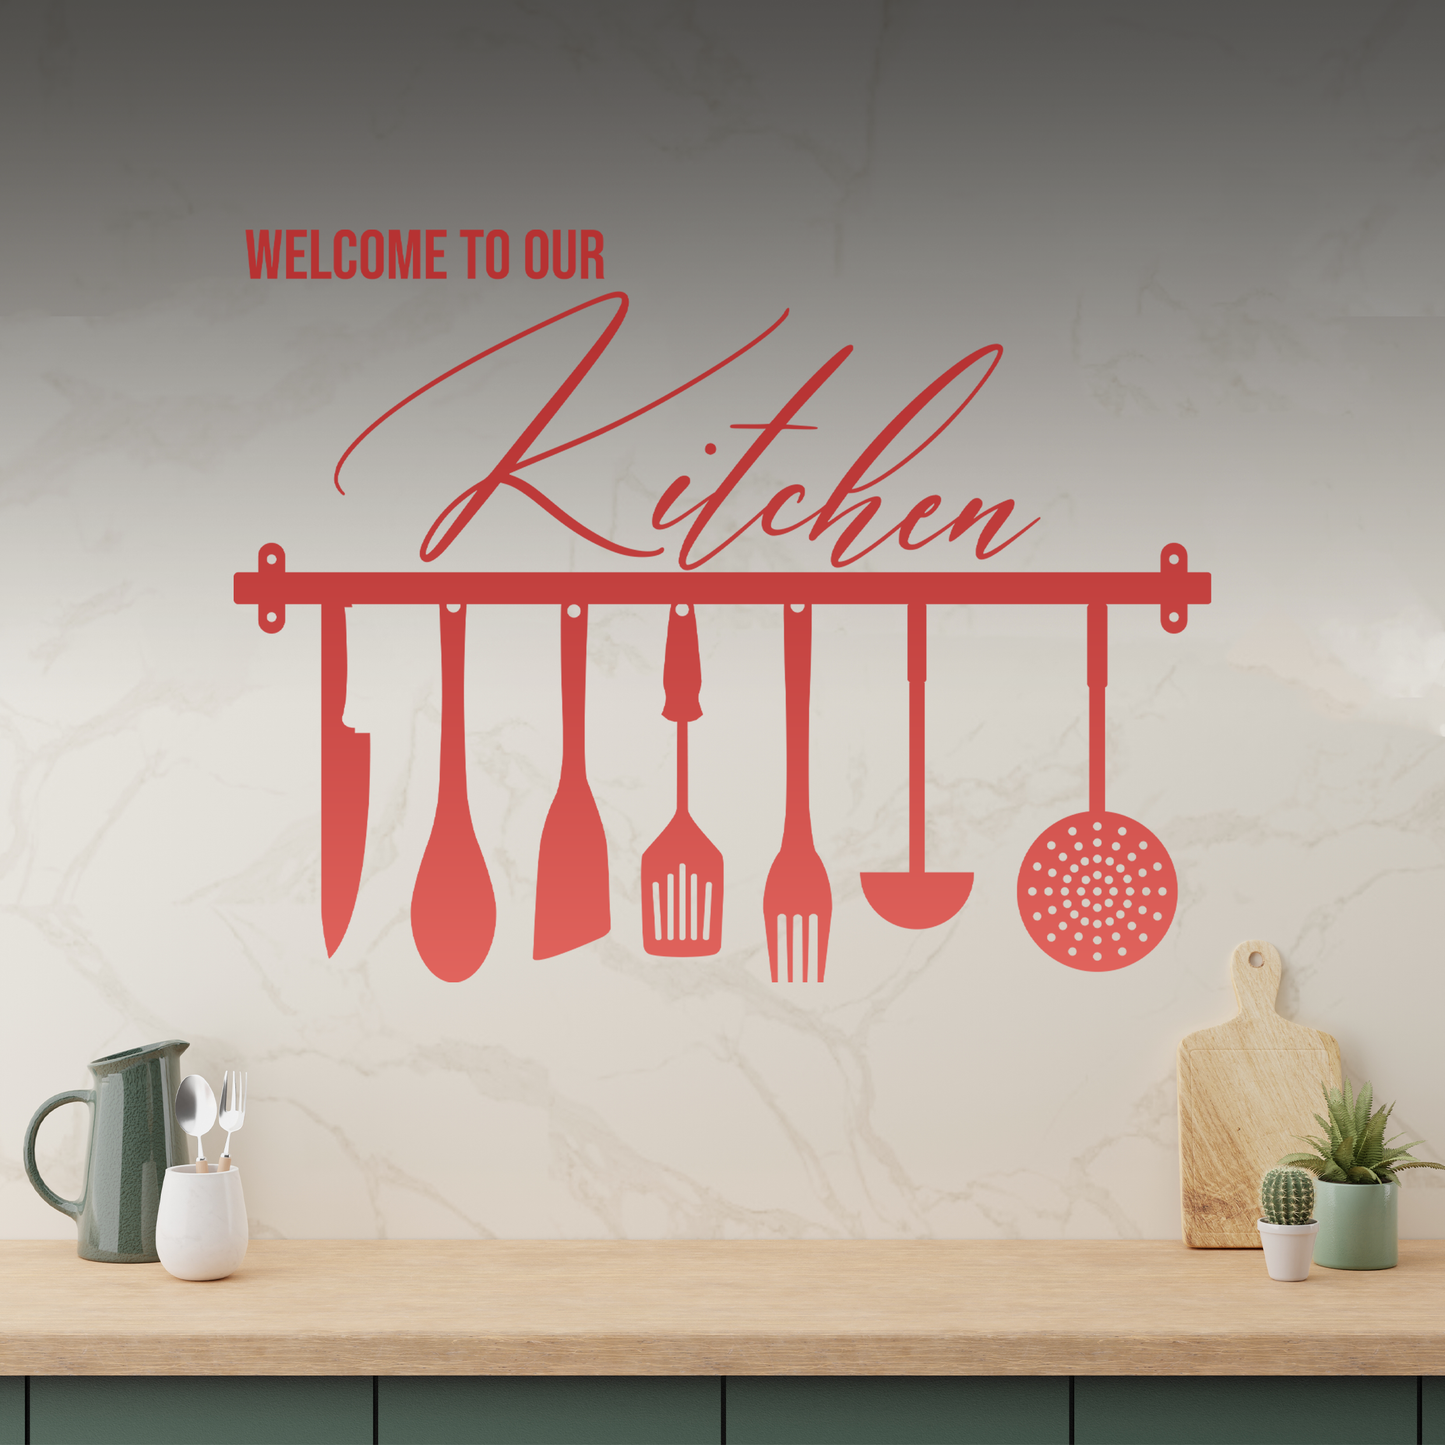 Welcome to our Kitchen Wall Sticker Decal